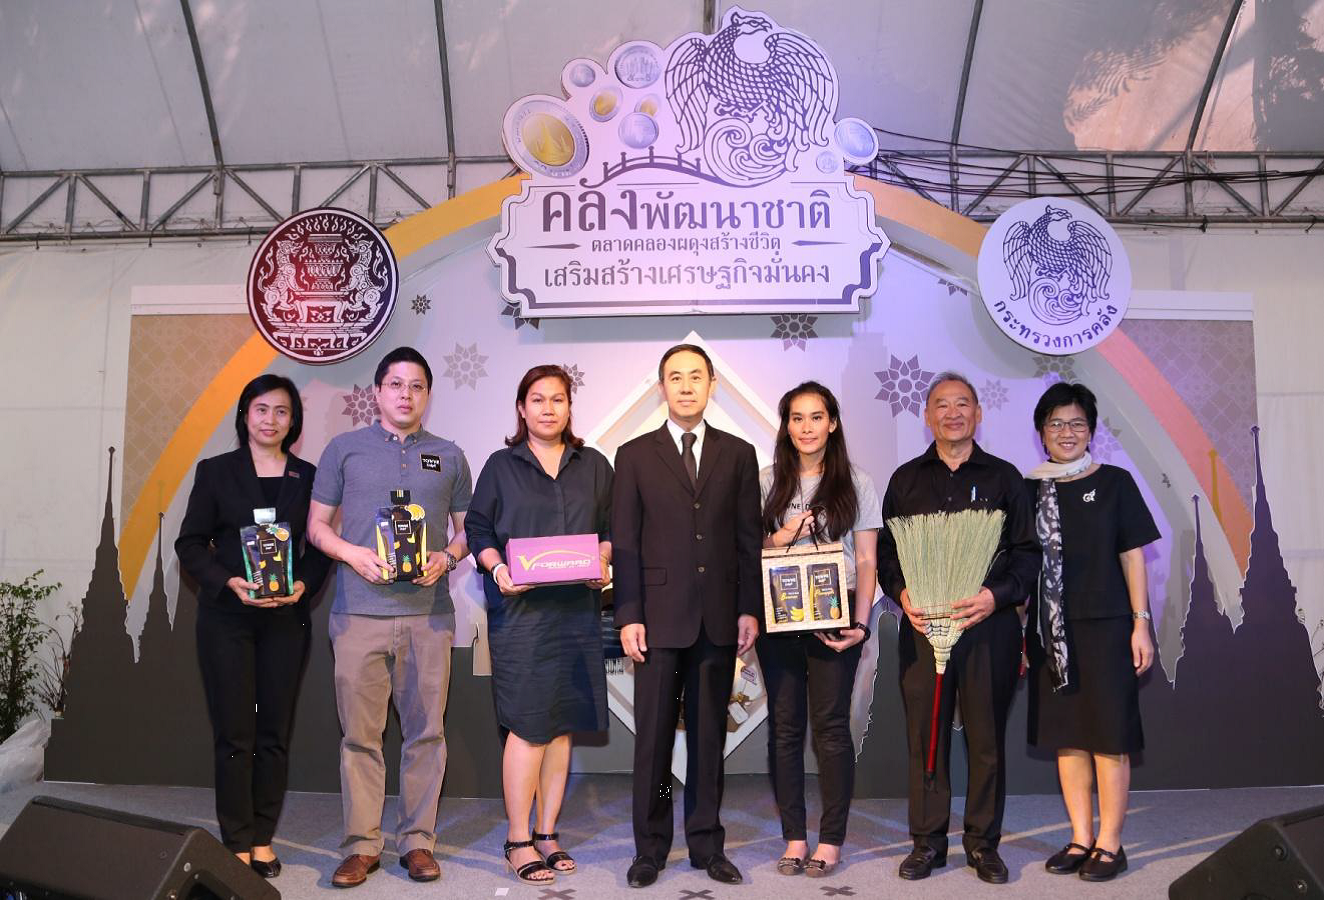 EXIM Thailand Promotes Export Merchandise in Khlong Phadung Krung Kasem Market Fair Hosted by Ministry of Finance